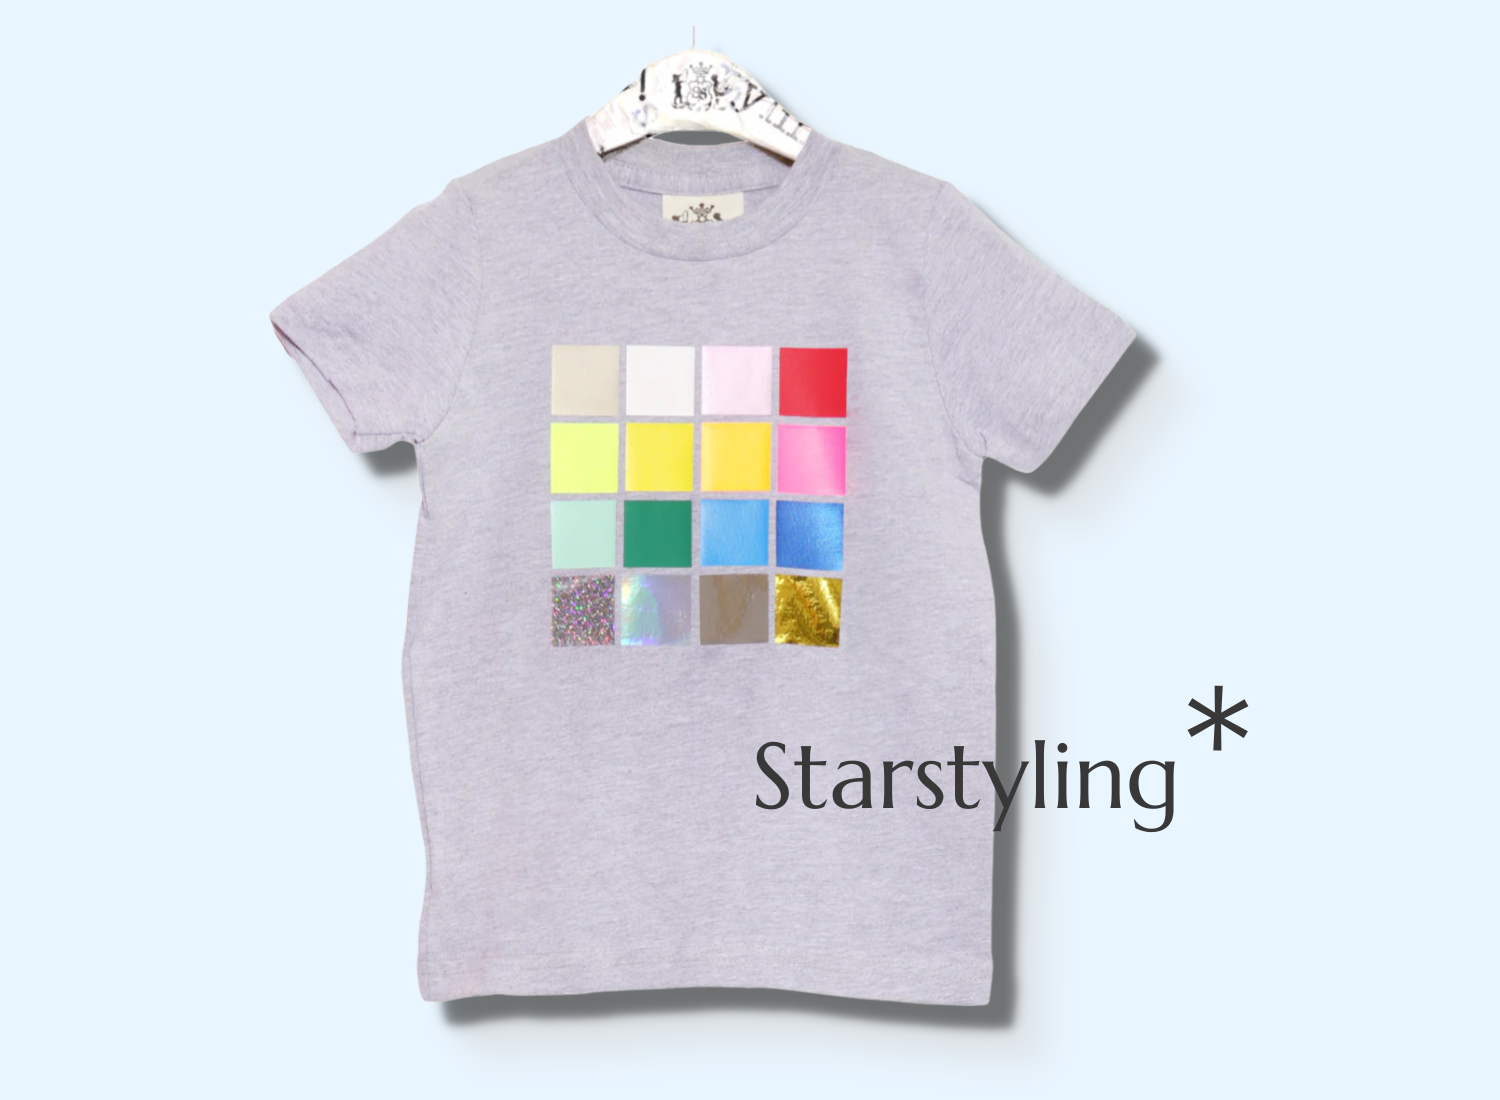 Starstyling - Be A Star Wherever You Are!